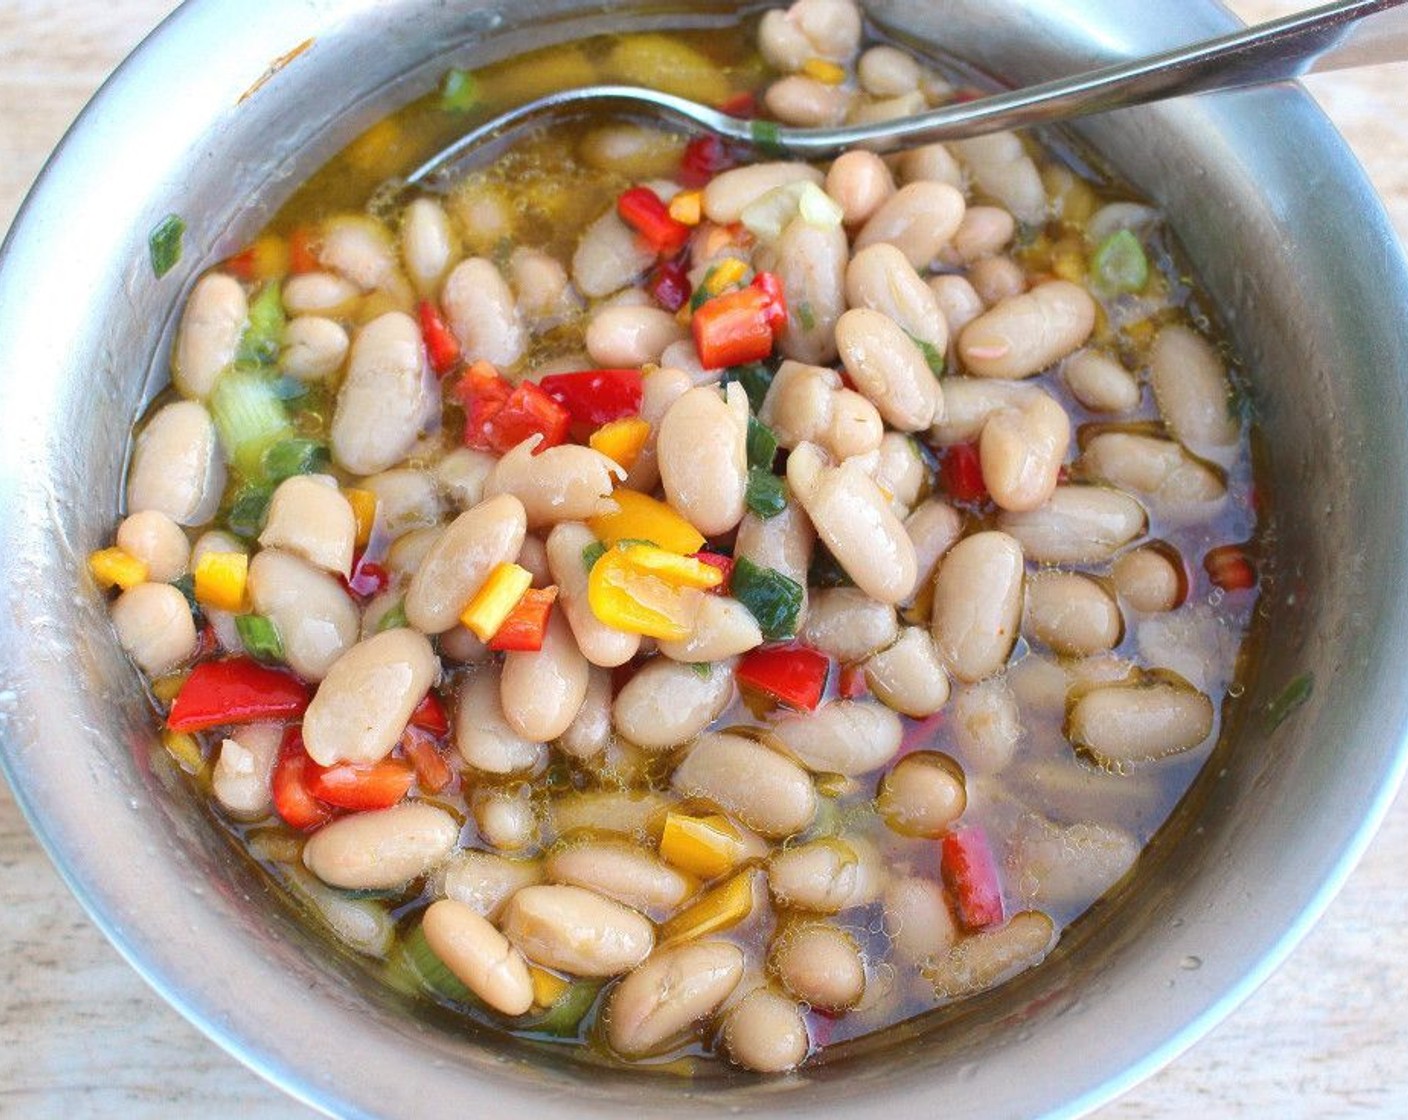 step 1 In a mixing bowl, combine Cannellini White Kidney Beans (1 can), Assorted Color Bell Peppers (1/2 cup), Scallion (1/4 cup), Extra-Virgin Olive Oil (1/2 cup), Garlic Paste (1/2 tsp), Apple Cider Vinegar (to taste), Cayenne Pepper (to taste), and Kosher Salt (to taste).